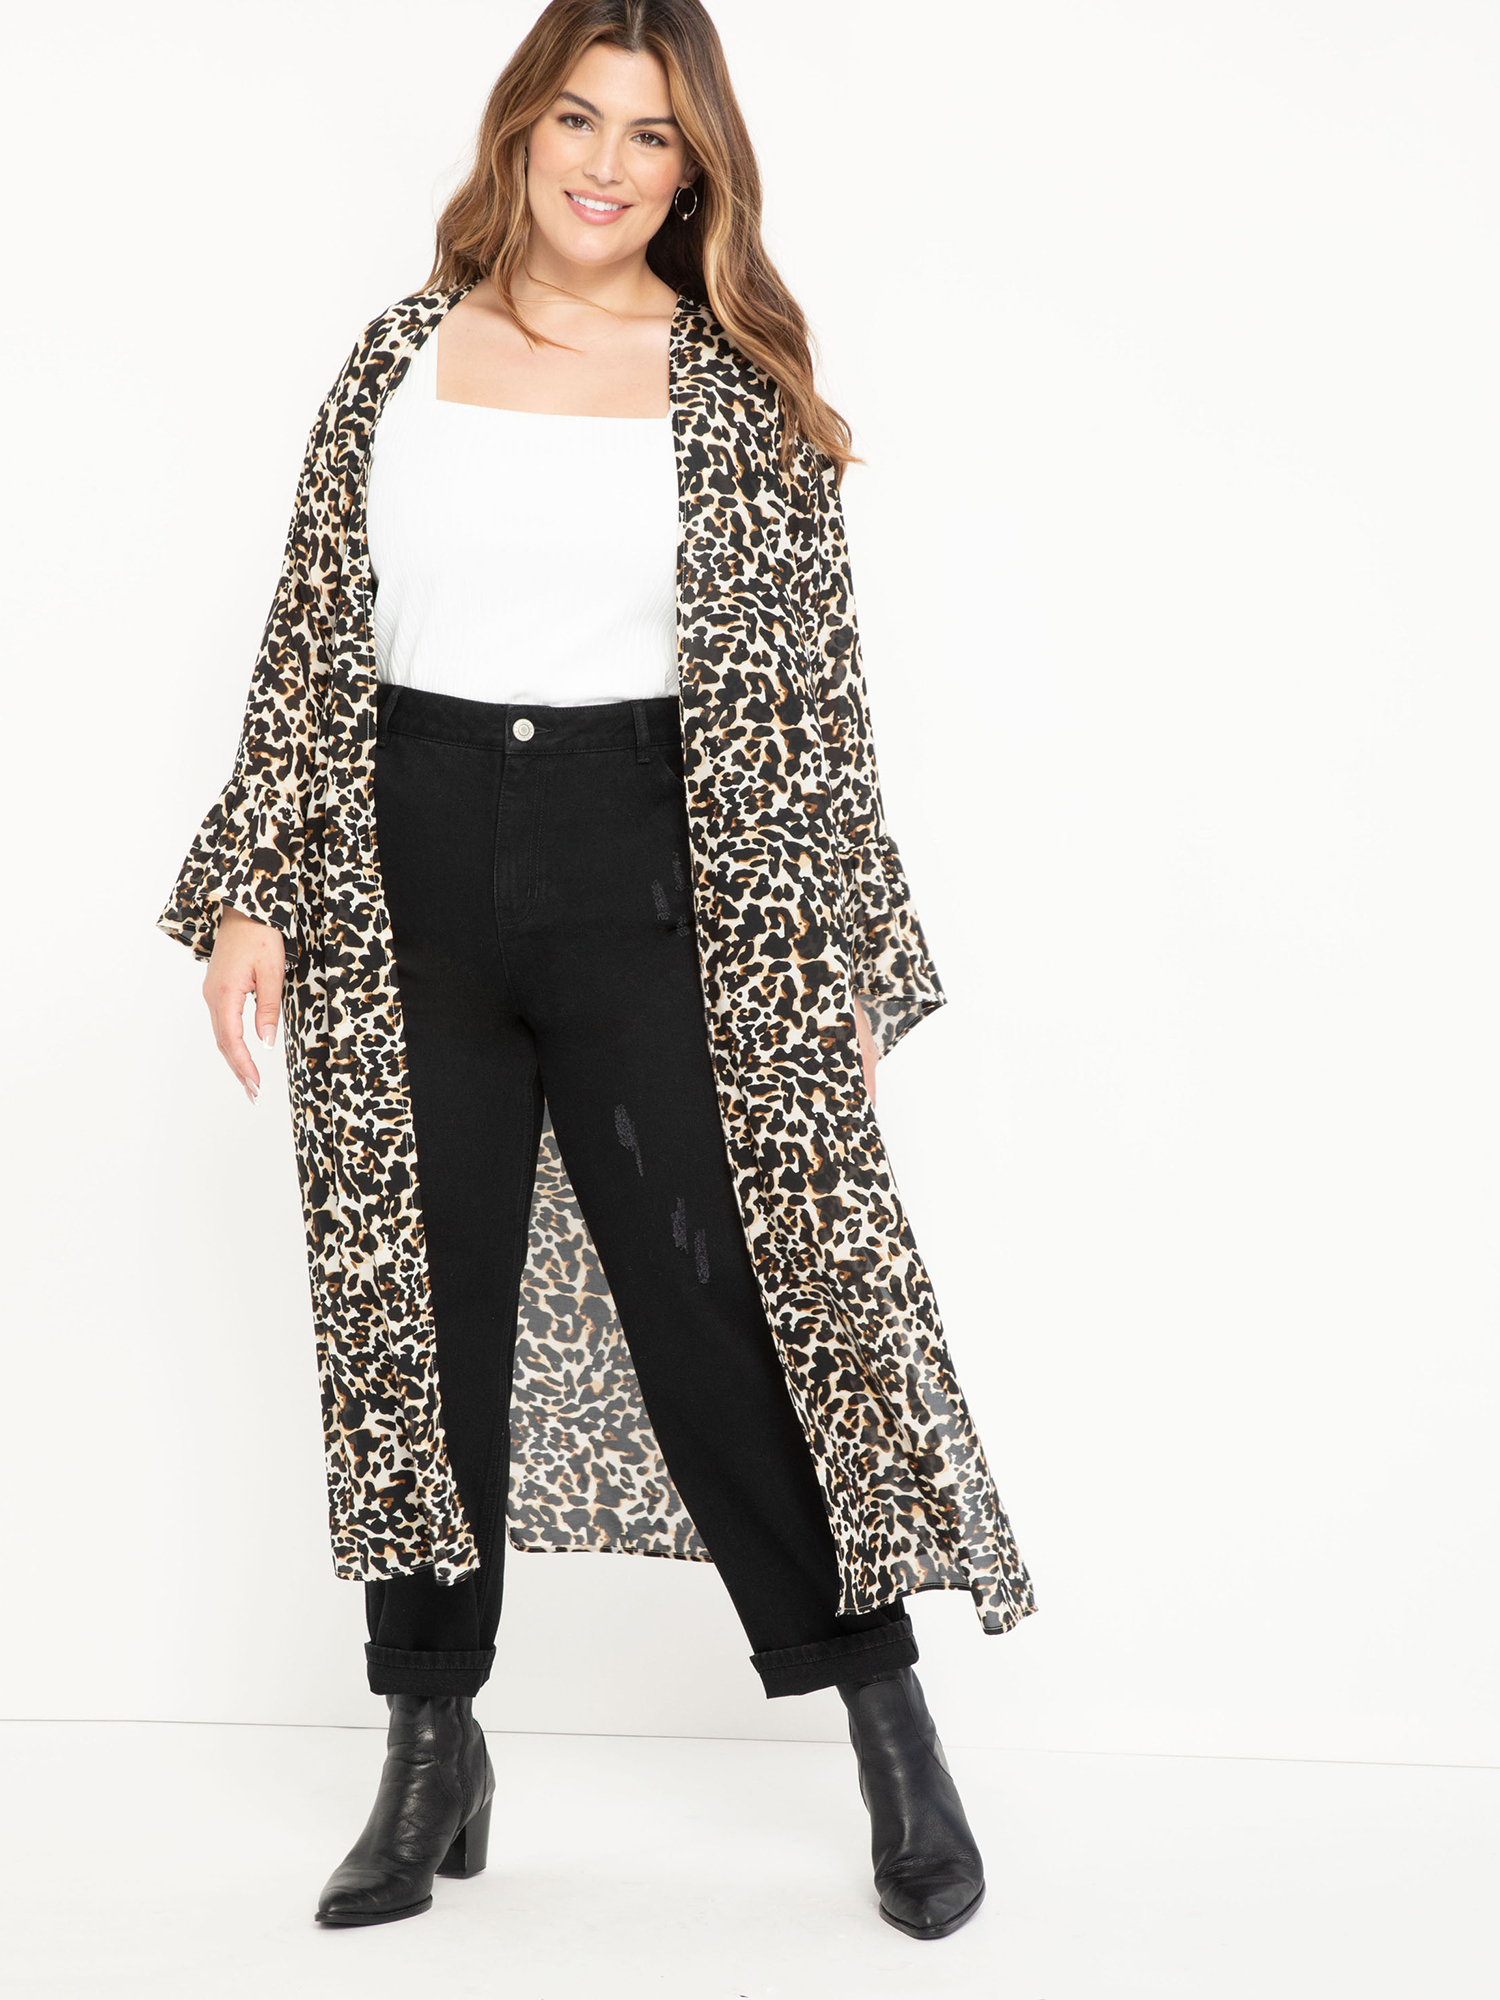 ELOQUII Elements Plus Size Leopard Print Duster with Statement Sleeves - image 1 of 4